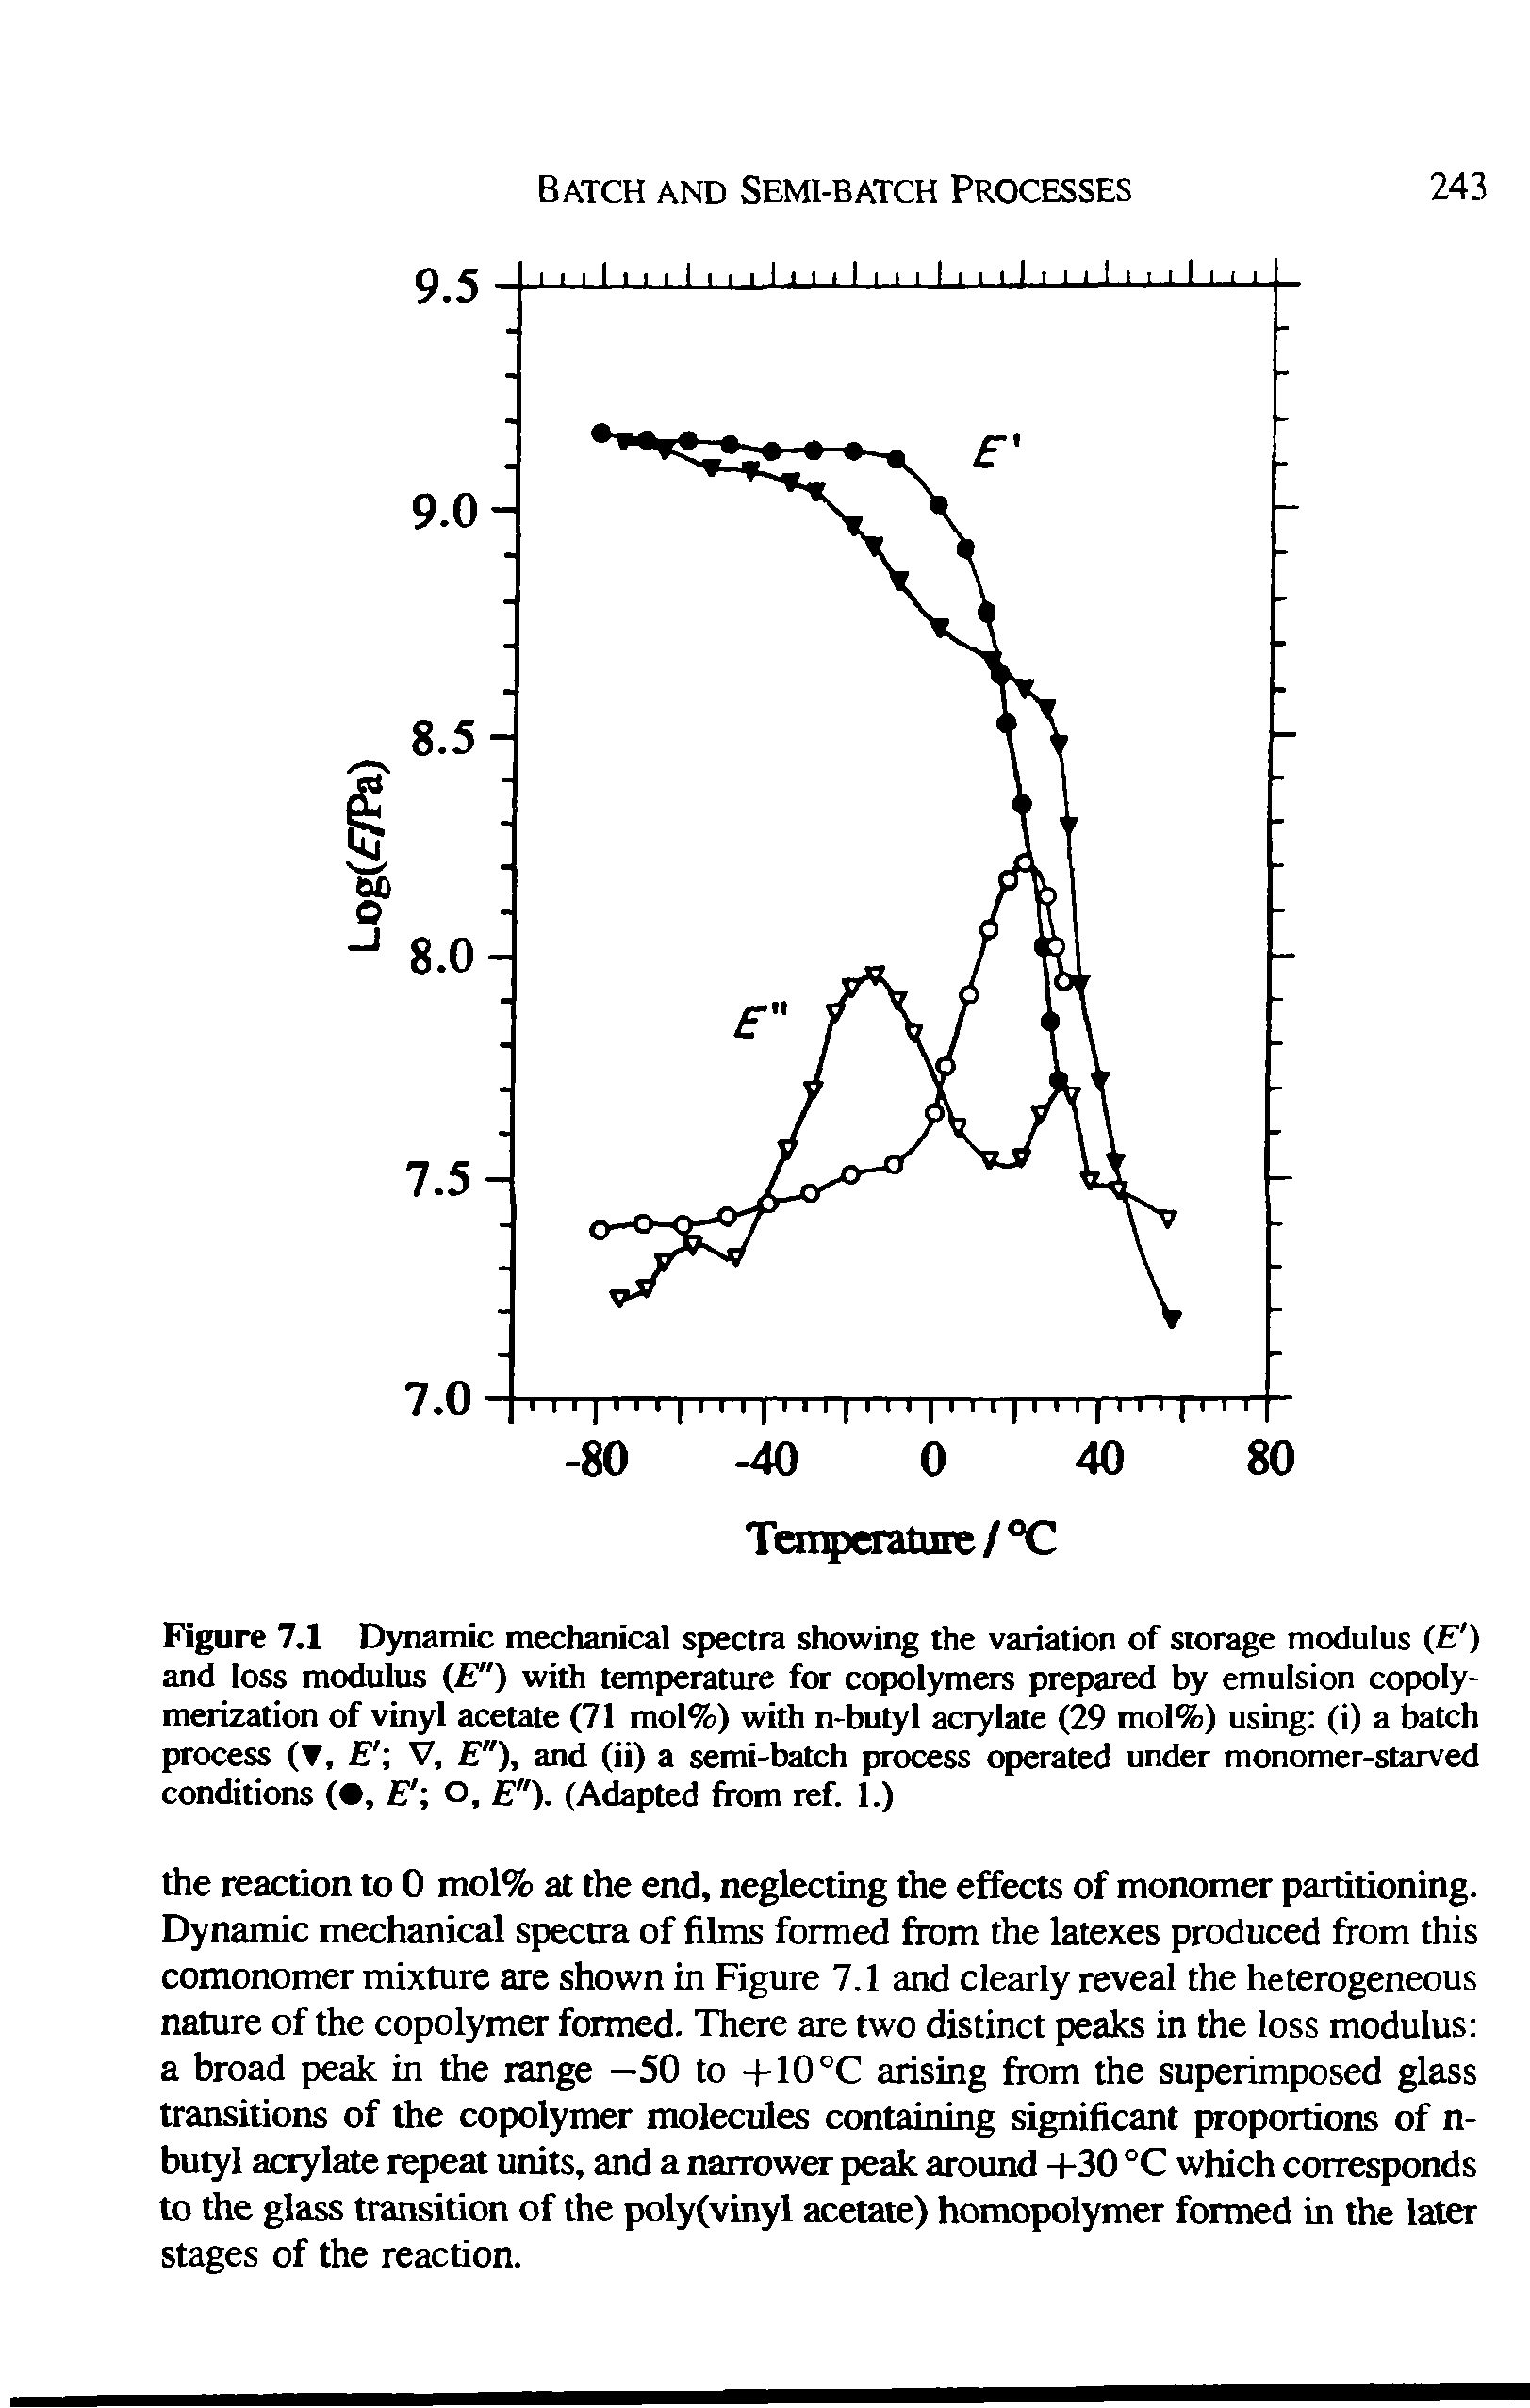 Figure 7.1 Dynamic mechanical spectra showing the variation of storage modulus ( ) and loss modulus ( ") with temperature for copolymers prepared by emulsion copolymerization of vinyl acetate (71 mol%) with n-butyl acrylate (29 mol%) using (i) a batch process (T, E V, E"), and (ii) a semi-batch process operated under monomer-starved conditions ( , " o, "). (Adapted from ref. 1.)...